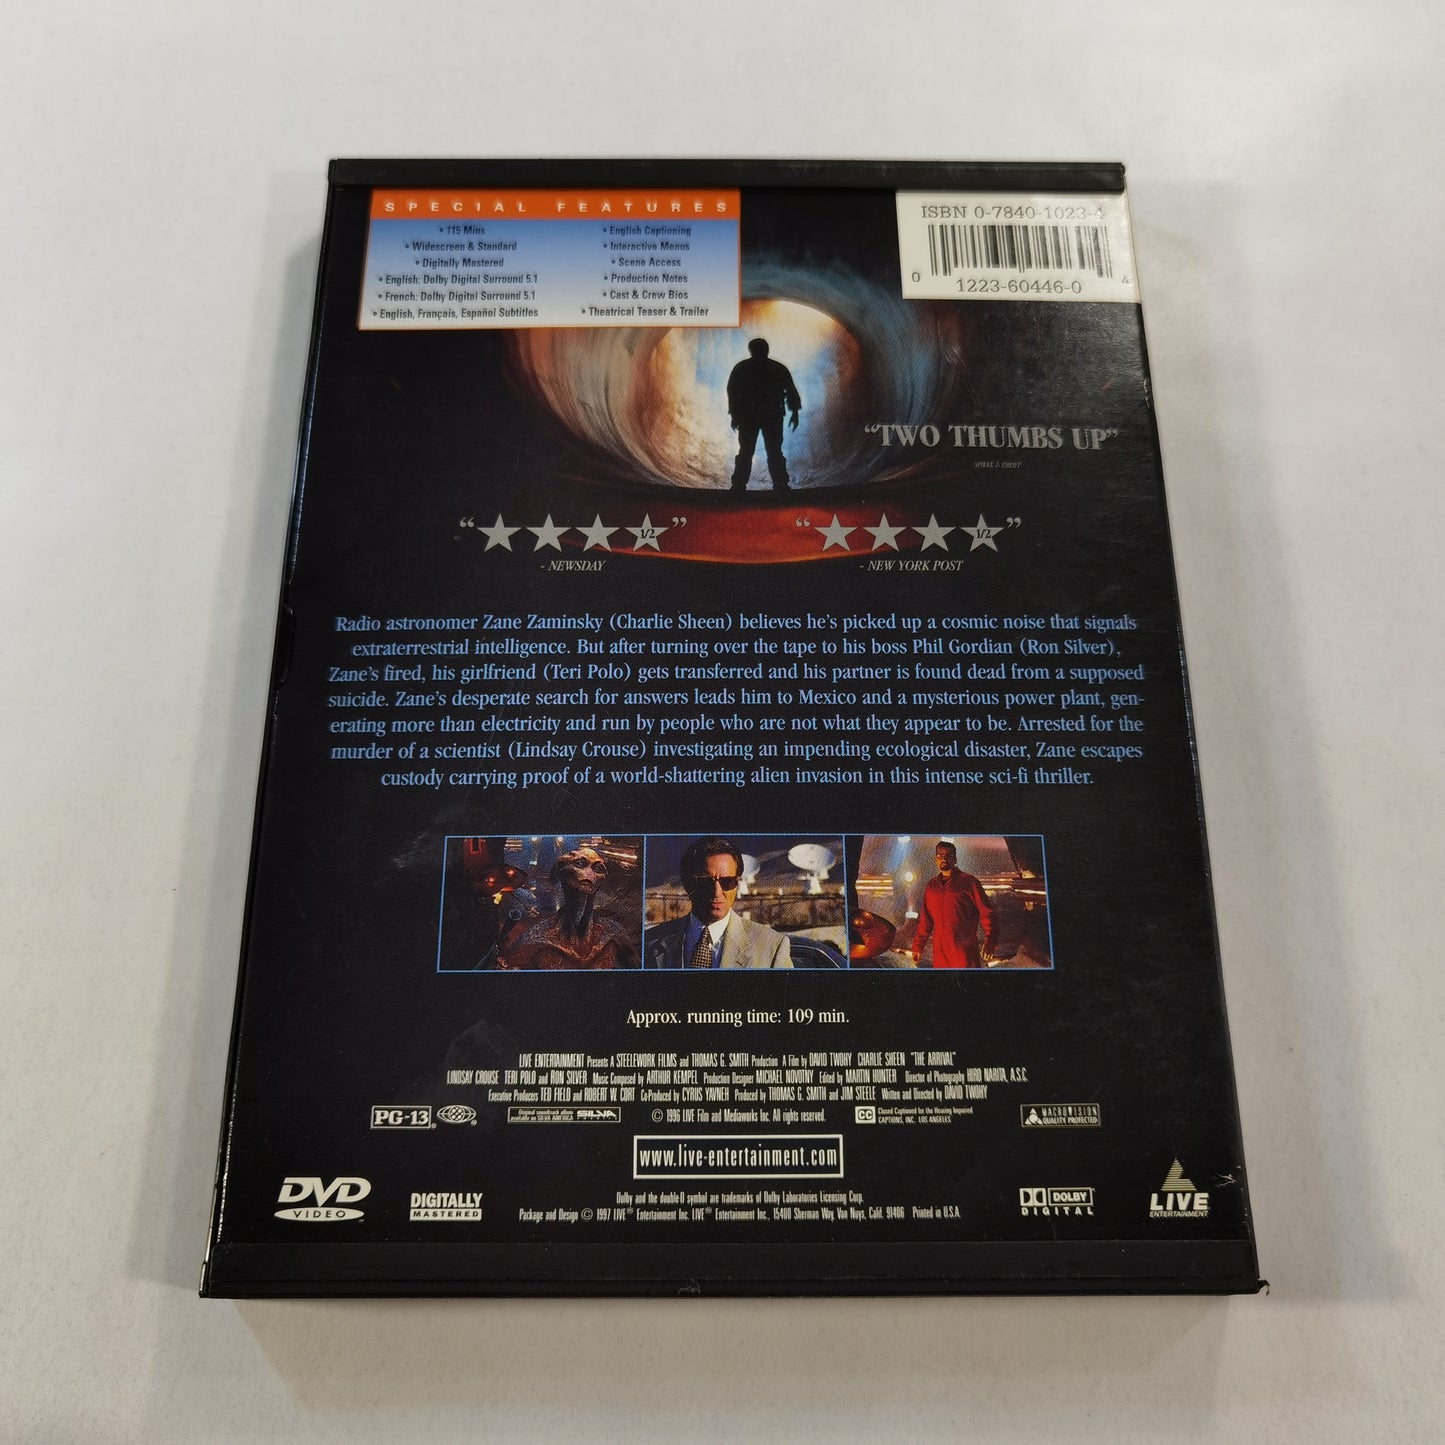 The Arrival (1996) - DVD US 1997 Snap Case